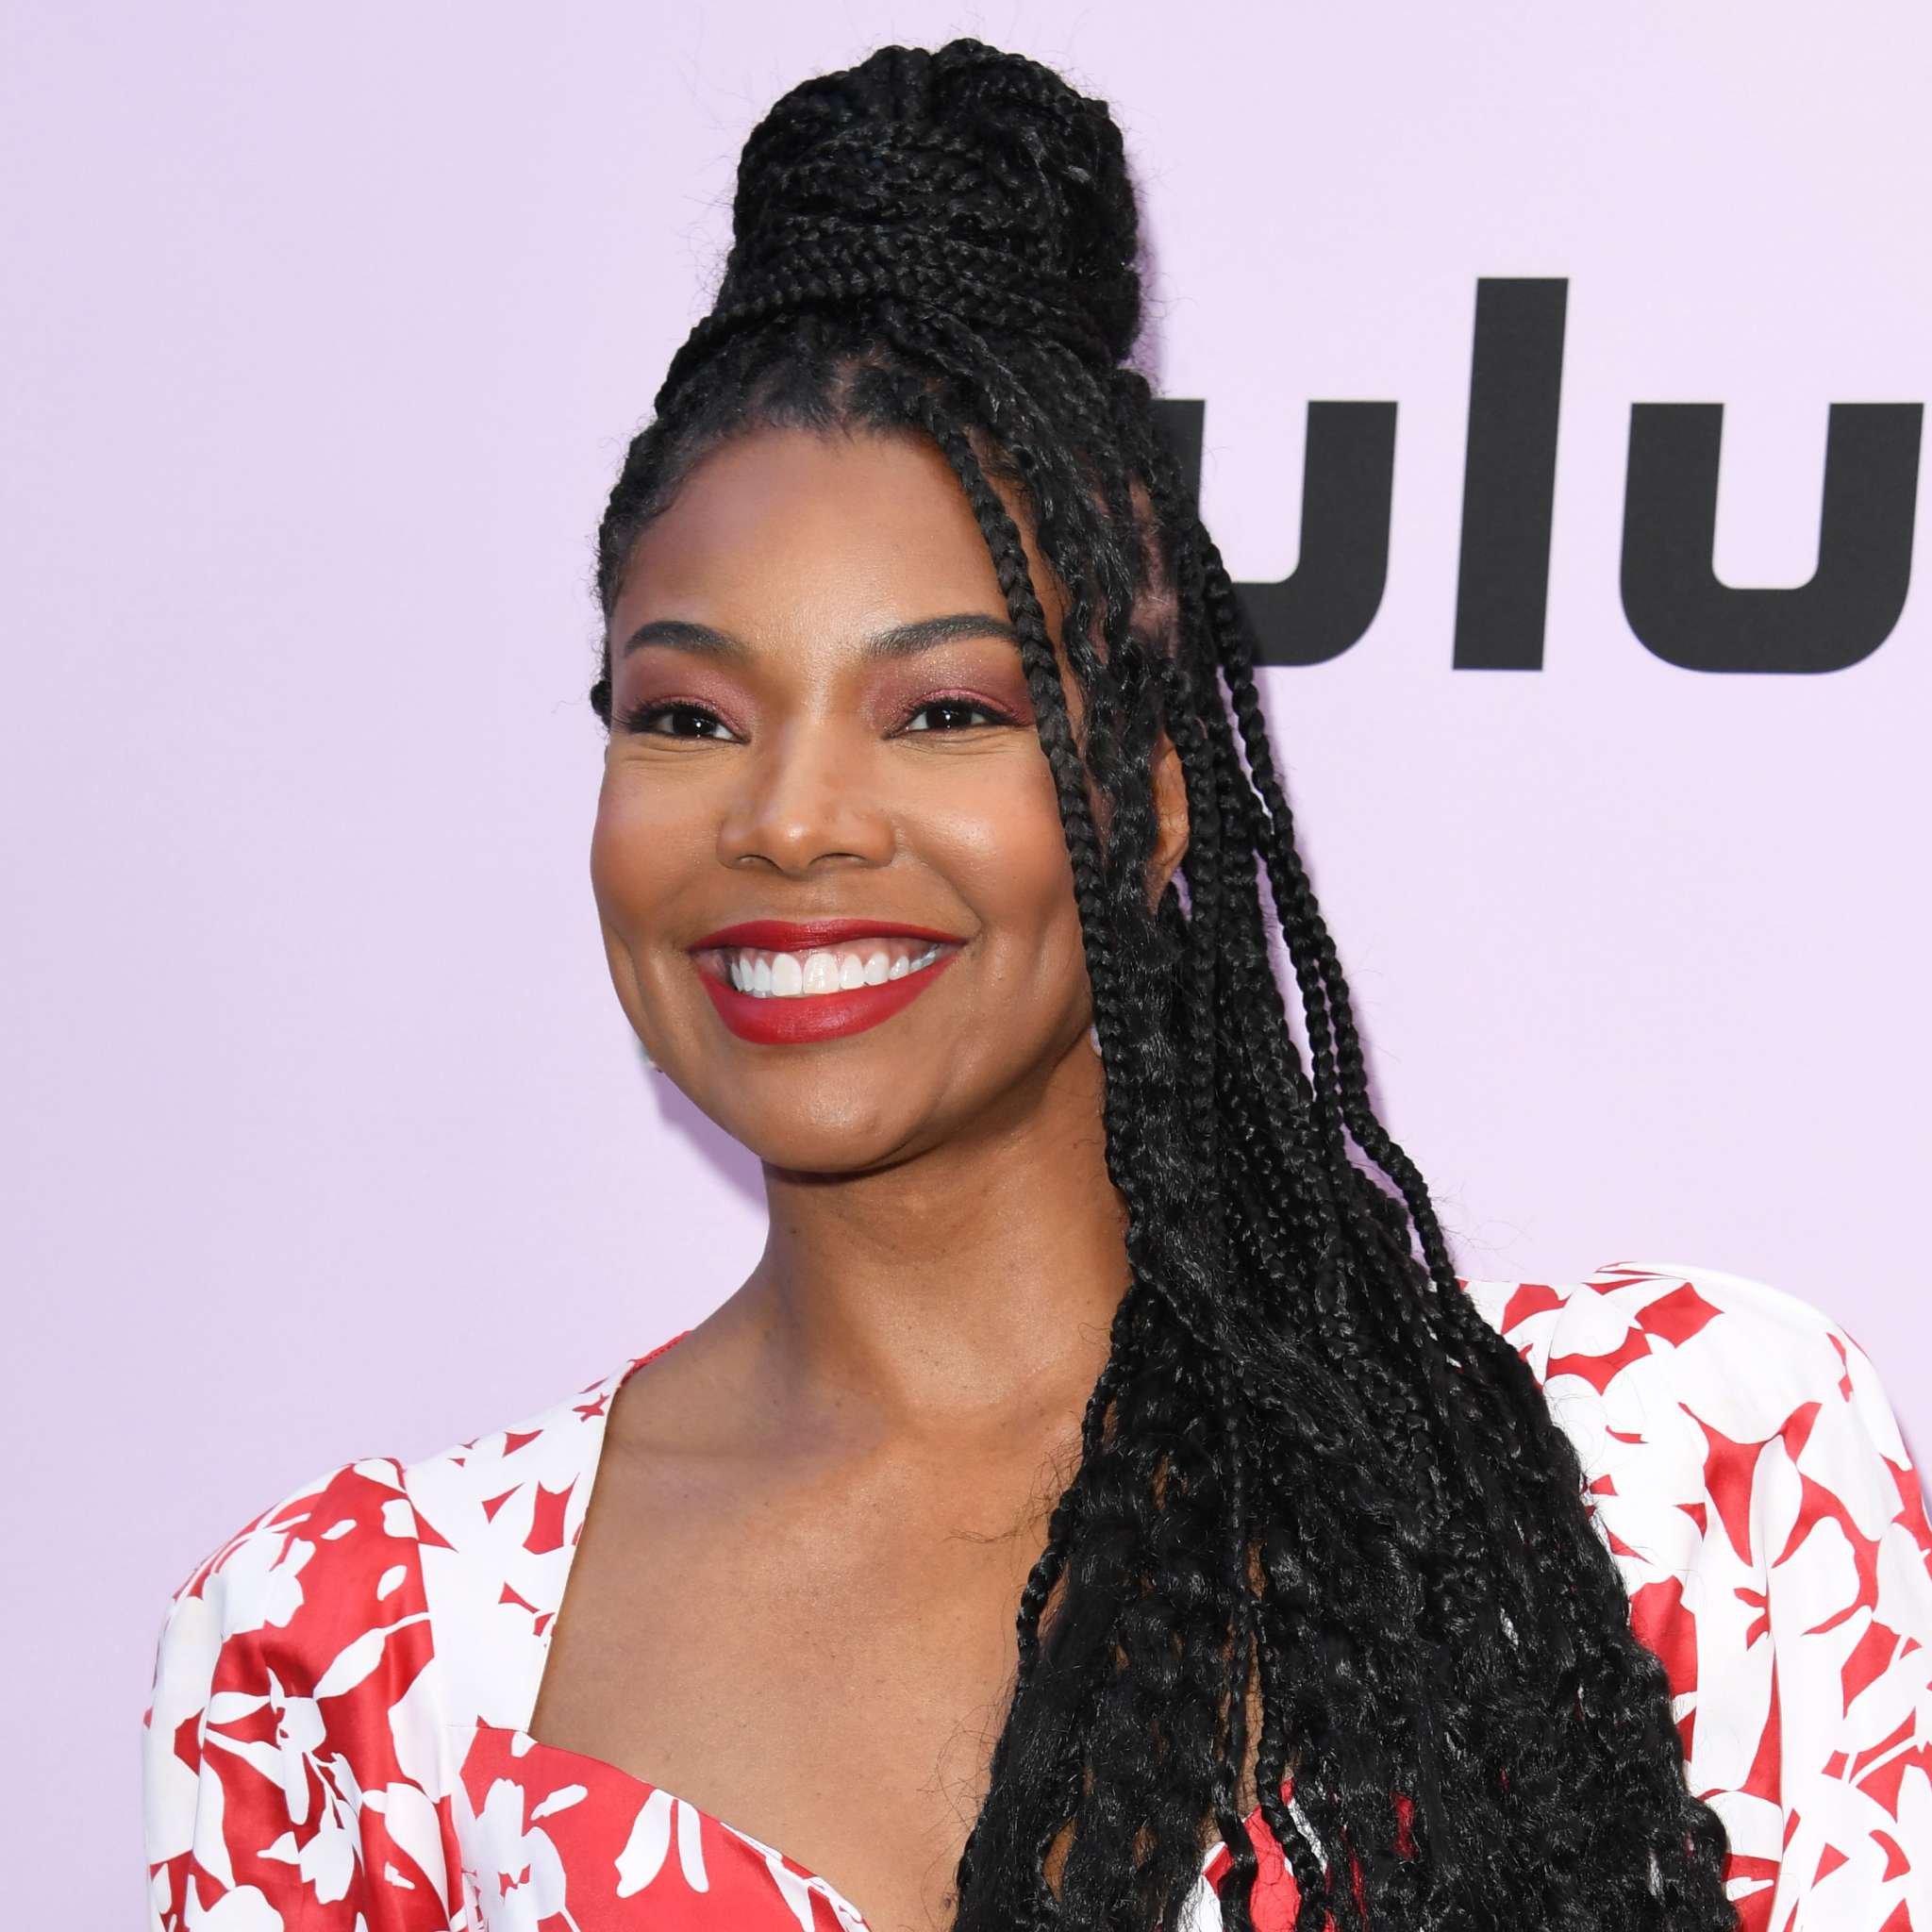 gabrielle-unions-fans-ask-for-a-netflix-series-including-her-daughter-kaavia-james